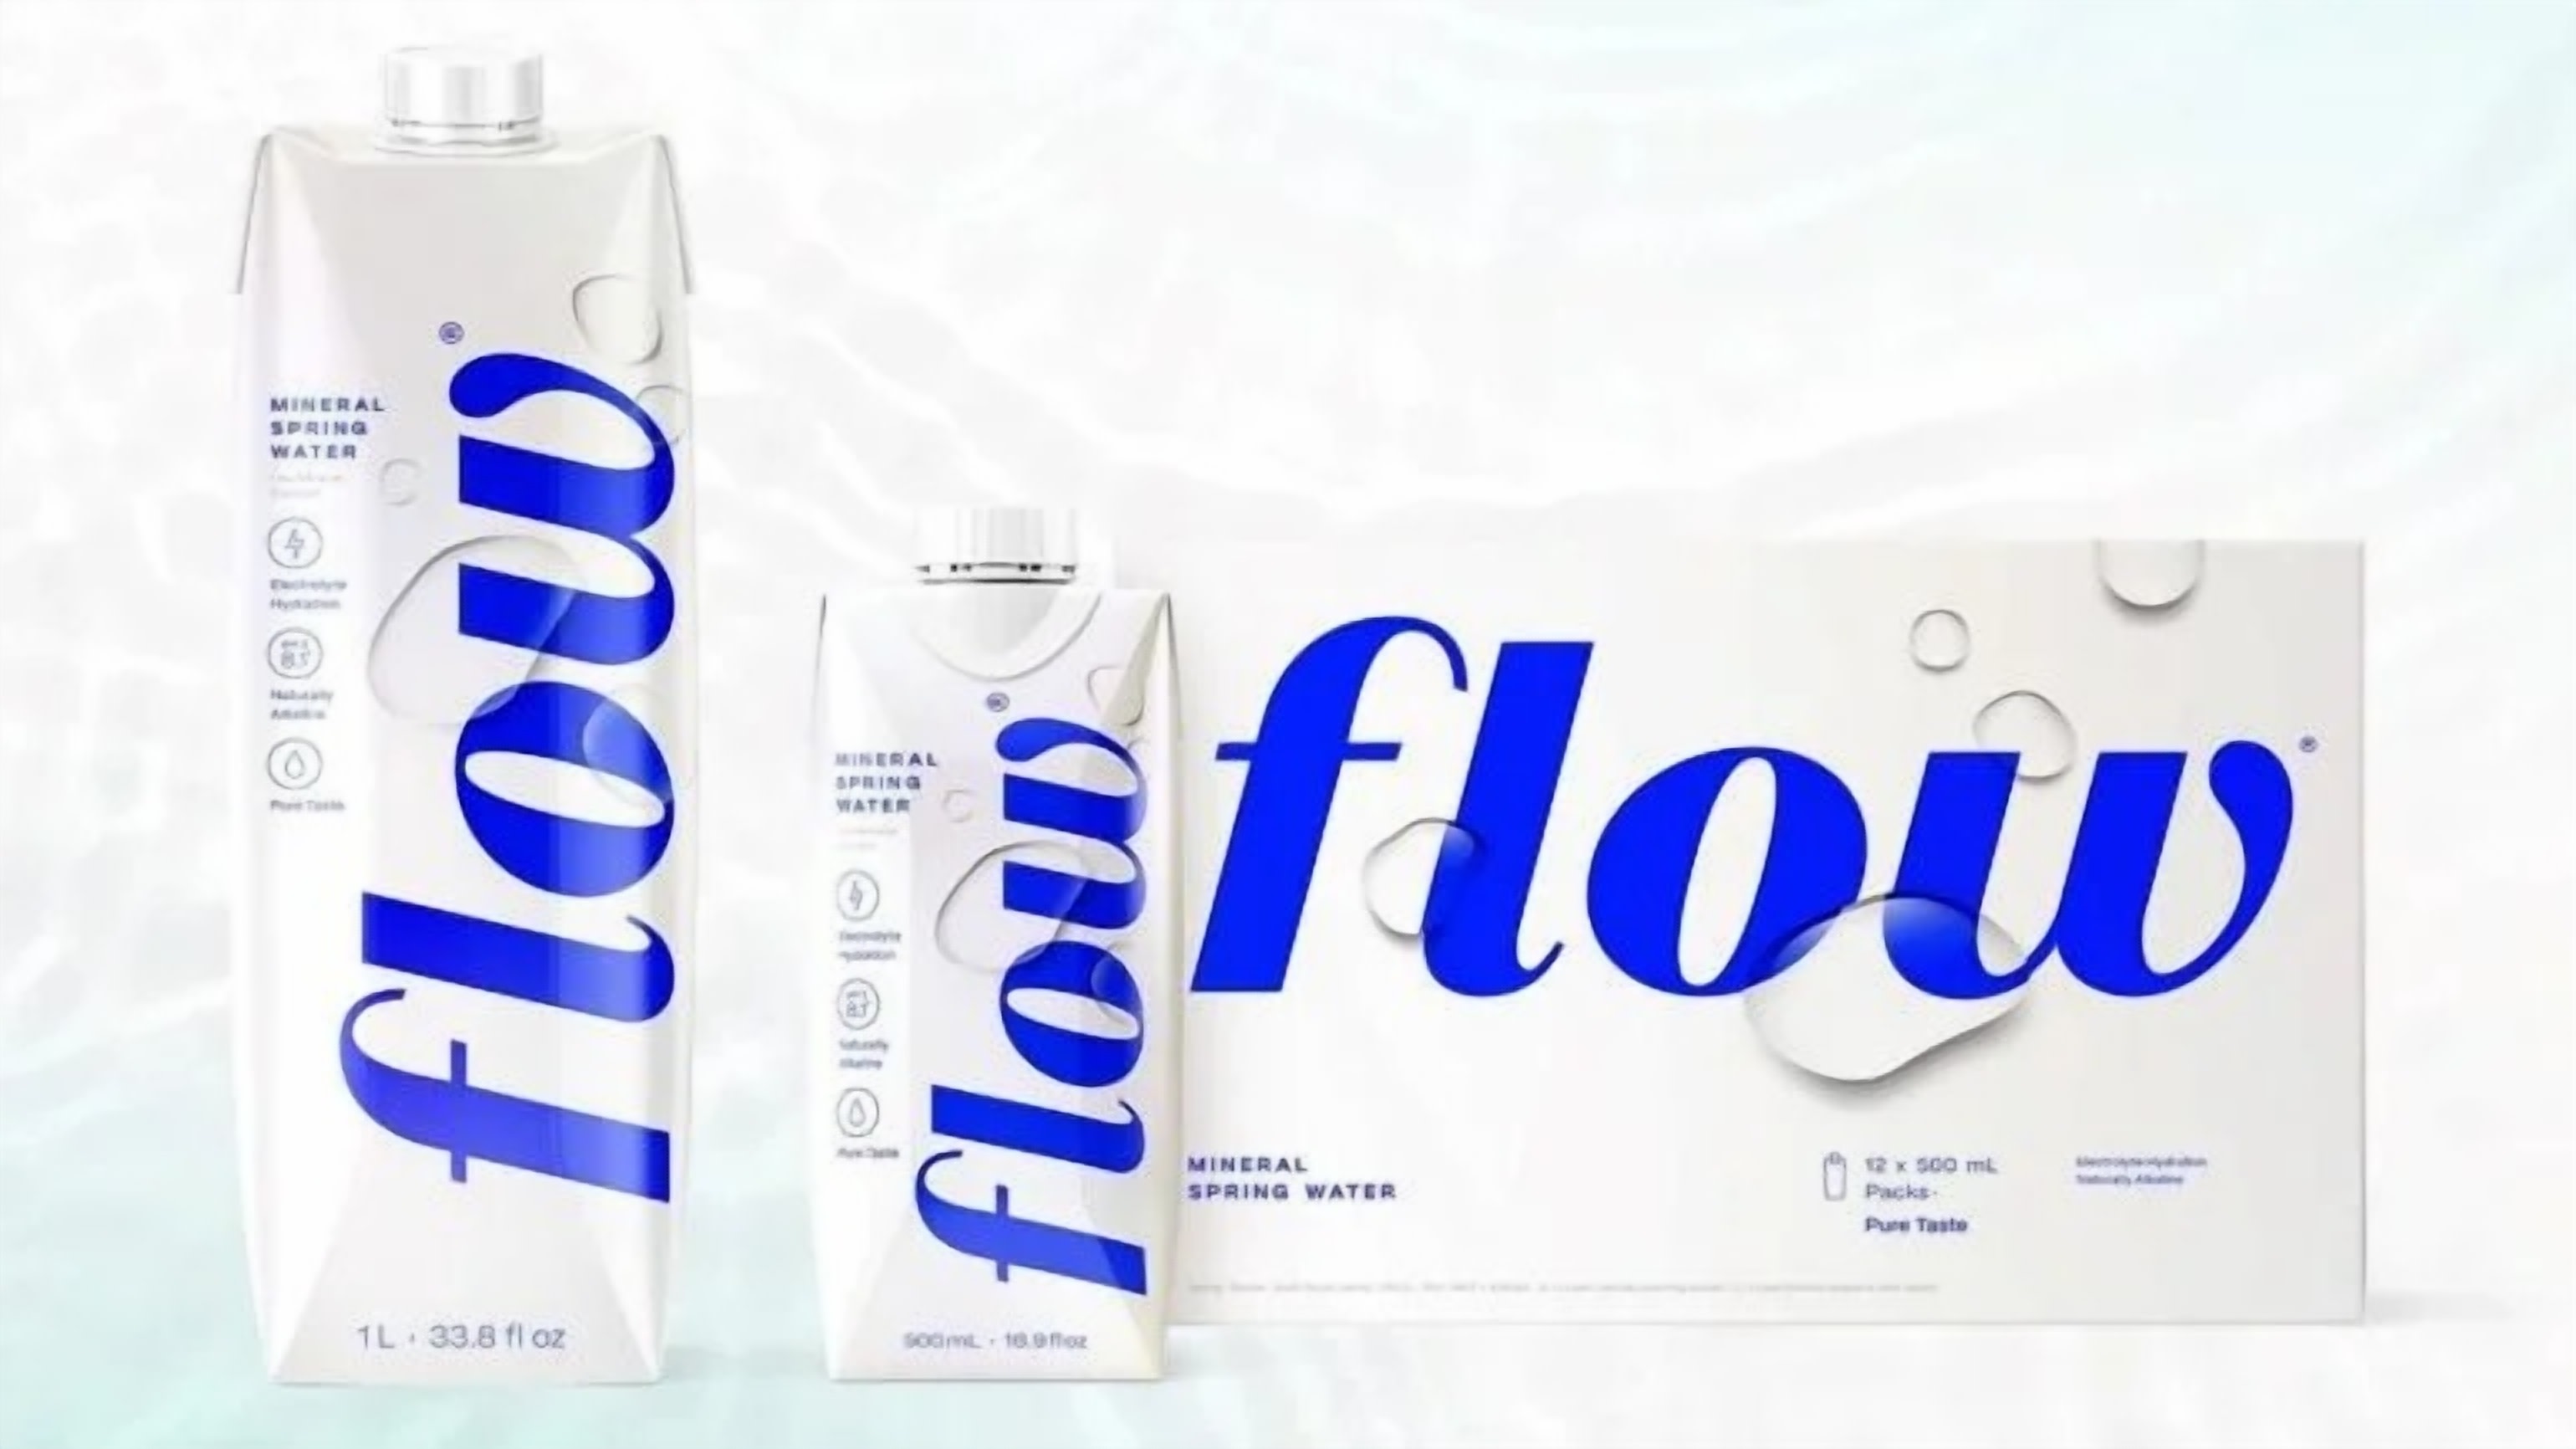 KnowESG_Flow Beverage Rebrands with Sustainable Shift